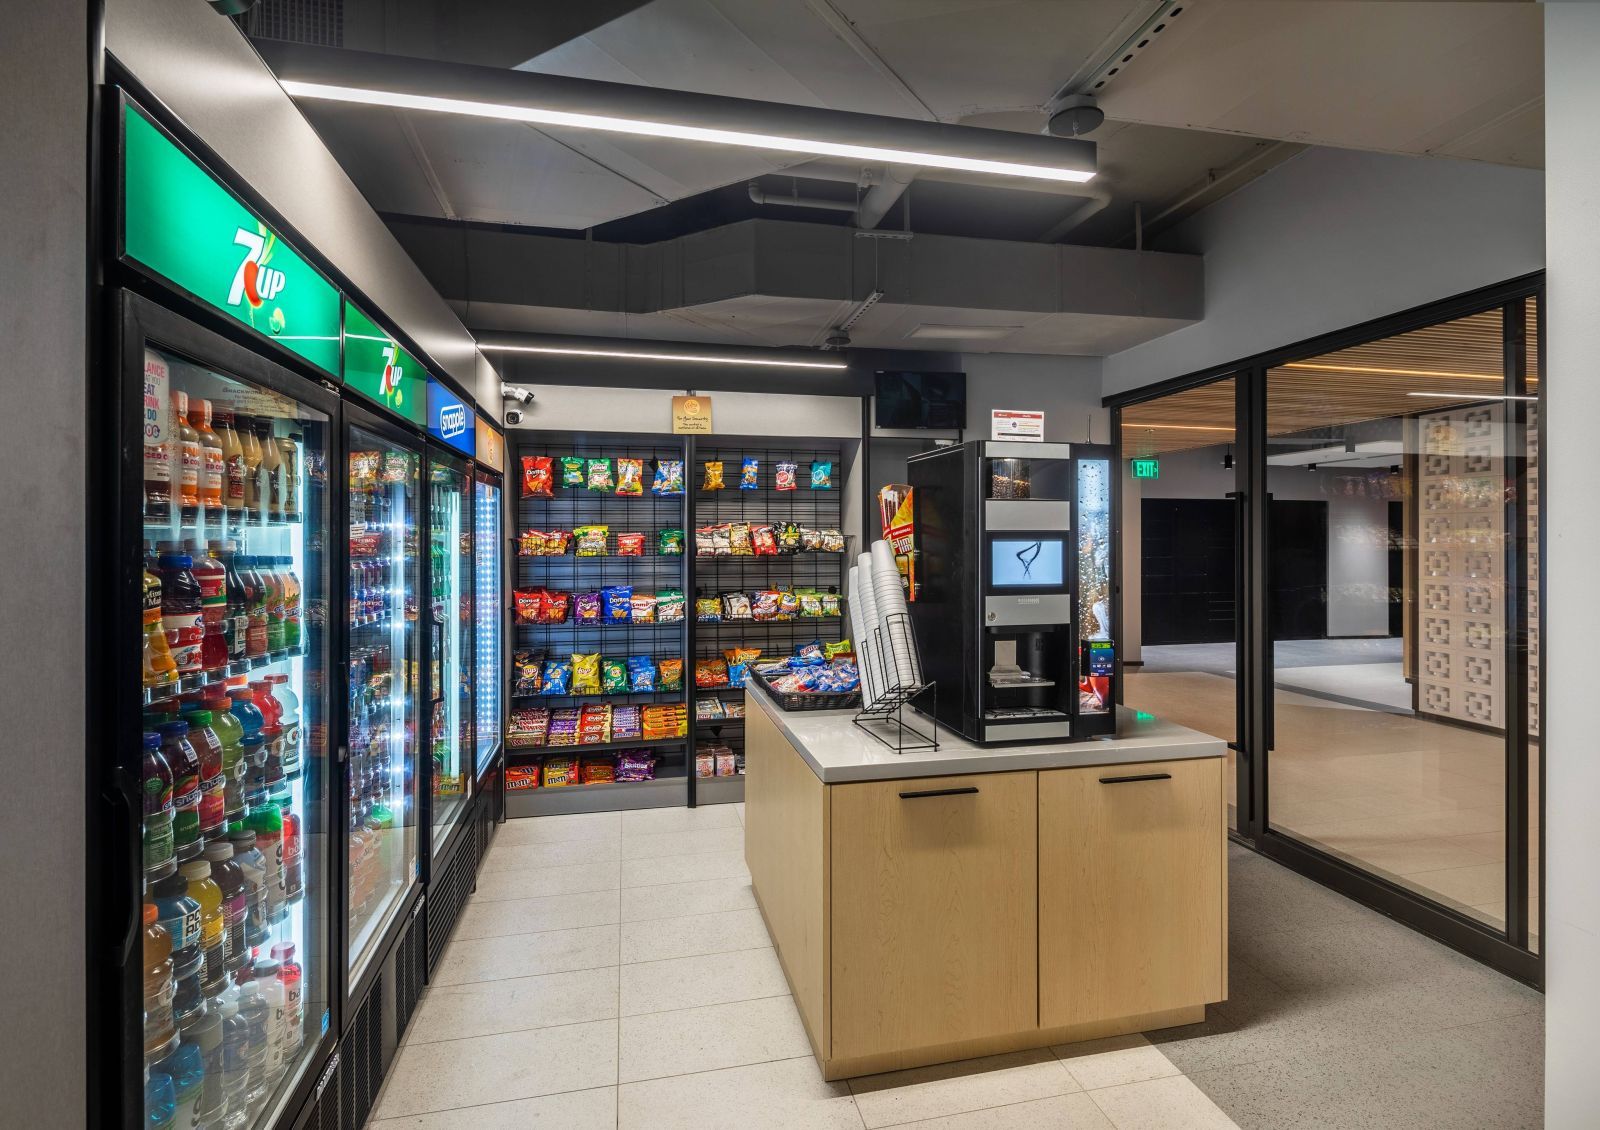 24/7 grab-n-go market interior at The Henry student housing tampa